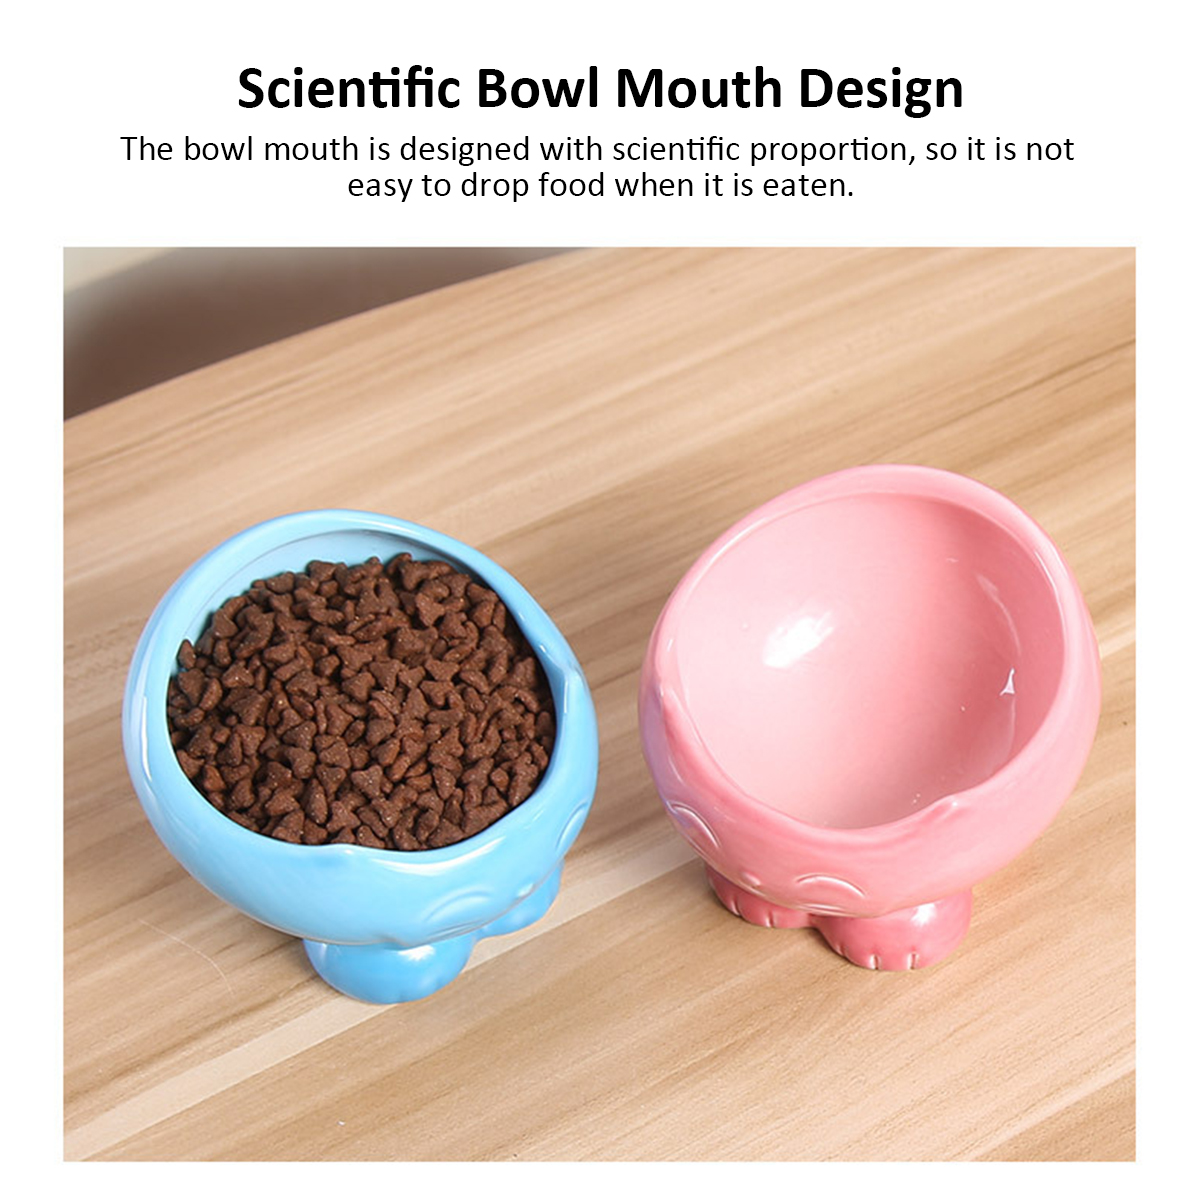 Cats-Feeding-Pet-Bowl-Food-Ceramic-Bowl-Puppy-Dogs-Snack-Water-Feeder-1691894-3